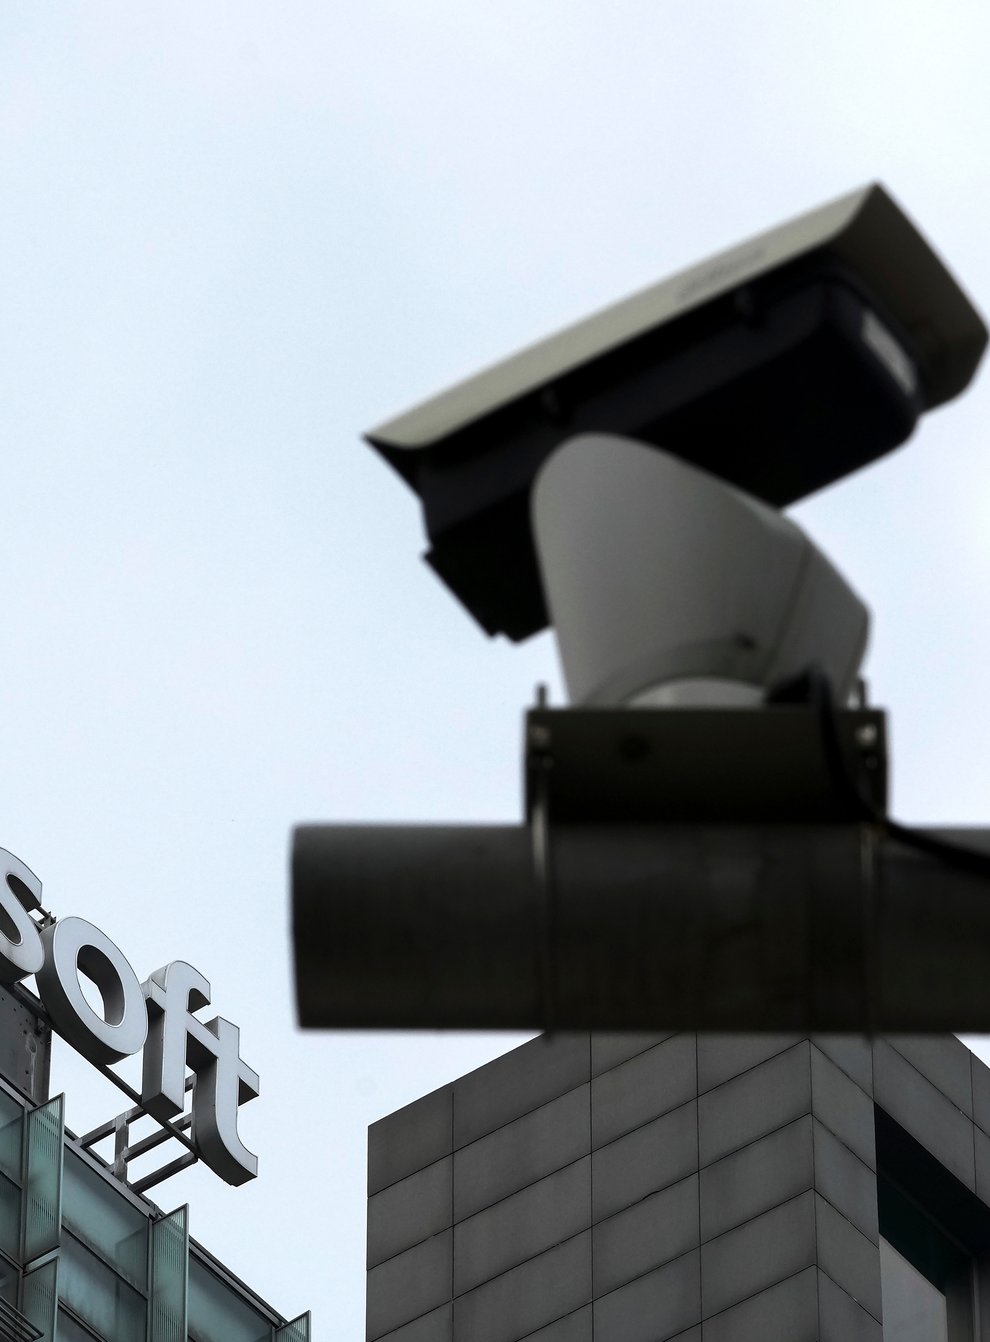 A security surveillance camera is seen near the Microsoft office building in Beijing (Andy Wong/AP)